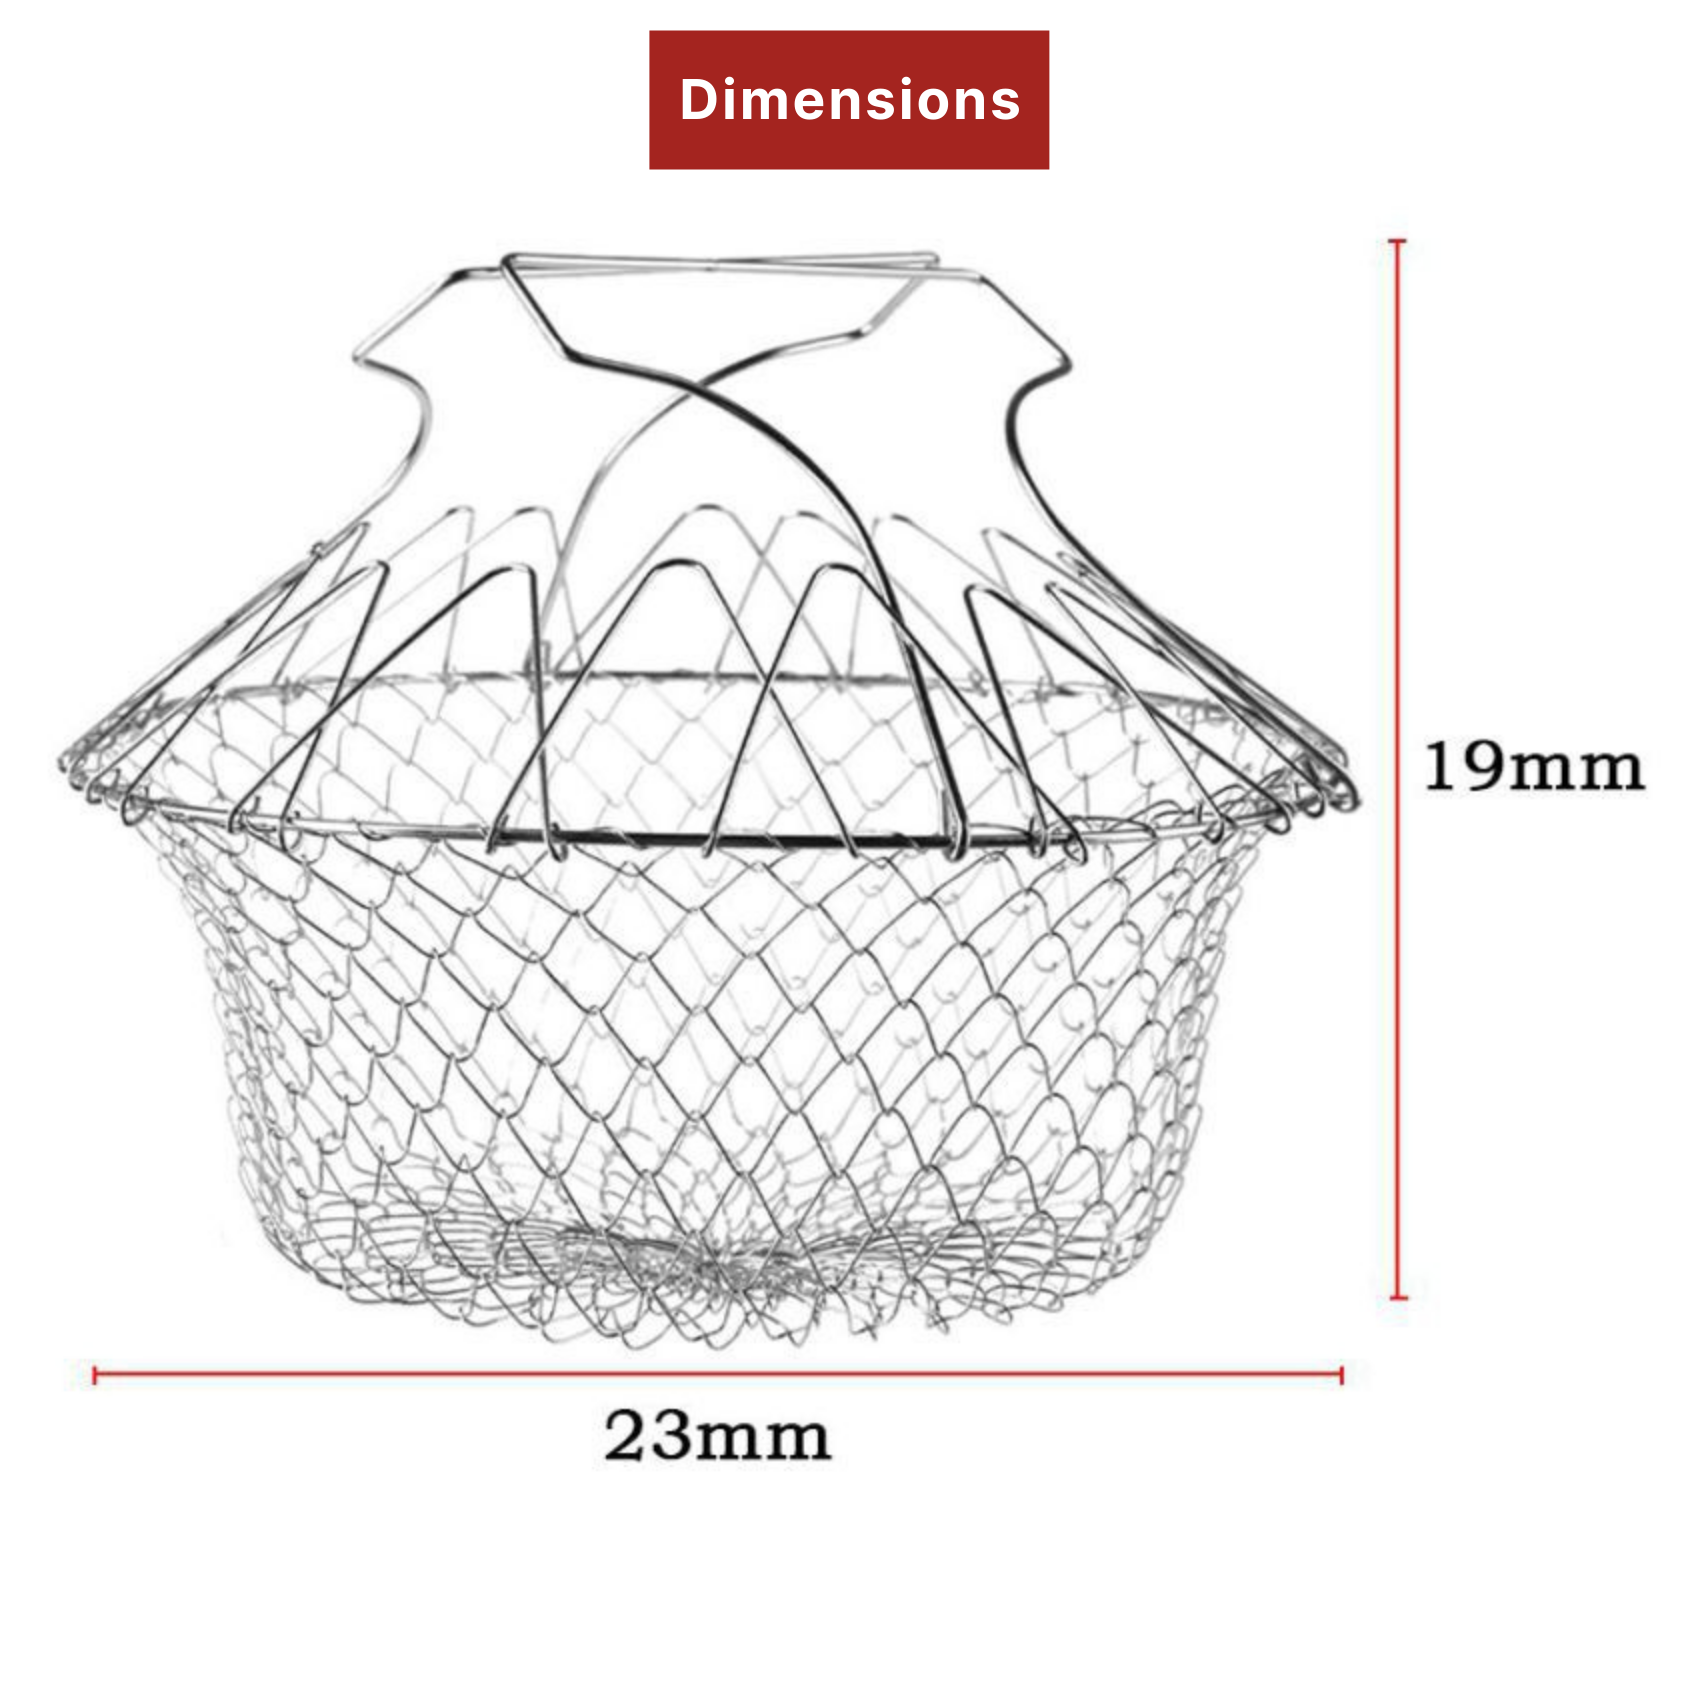 Fold-able stainless steel chef basket strainer net - steam, rinse, strain and fry